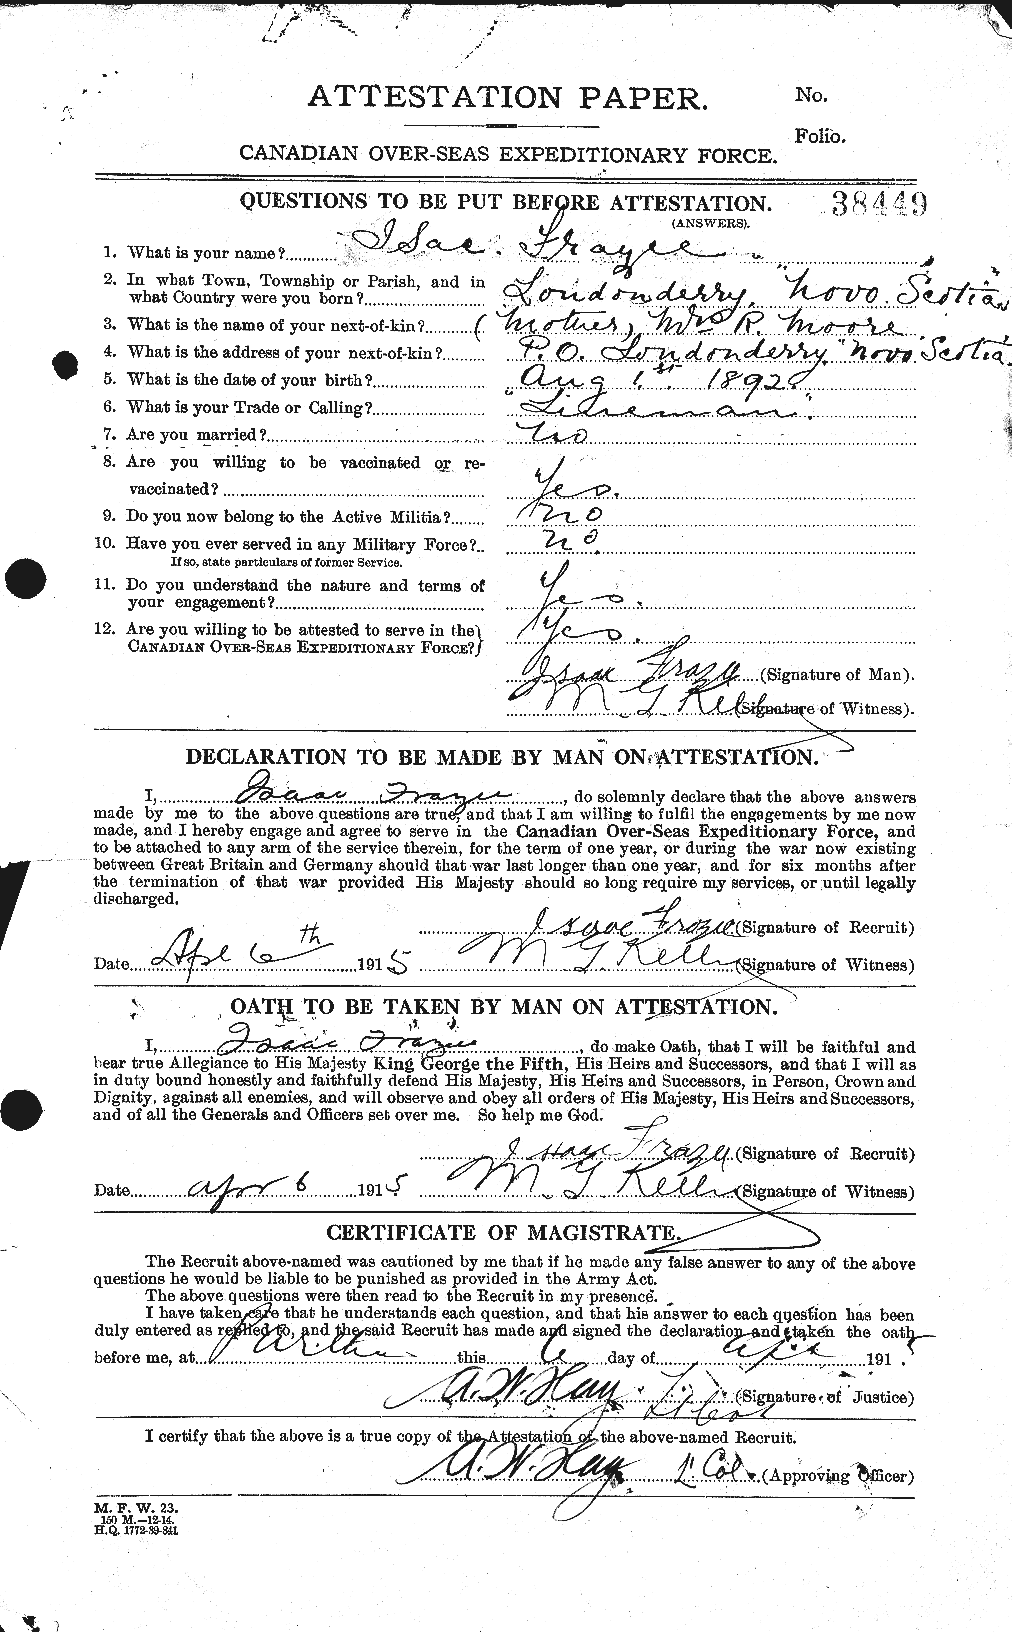 Personnel Records of the First World War - CEF 338438a